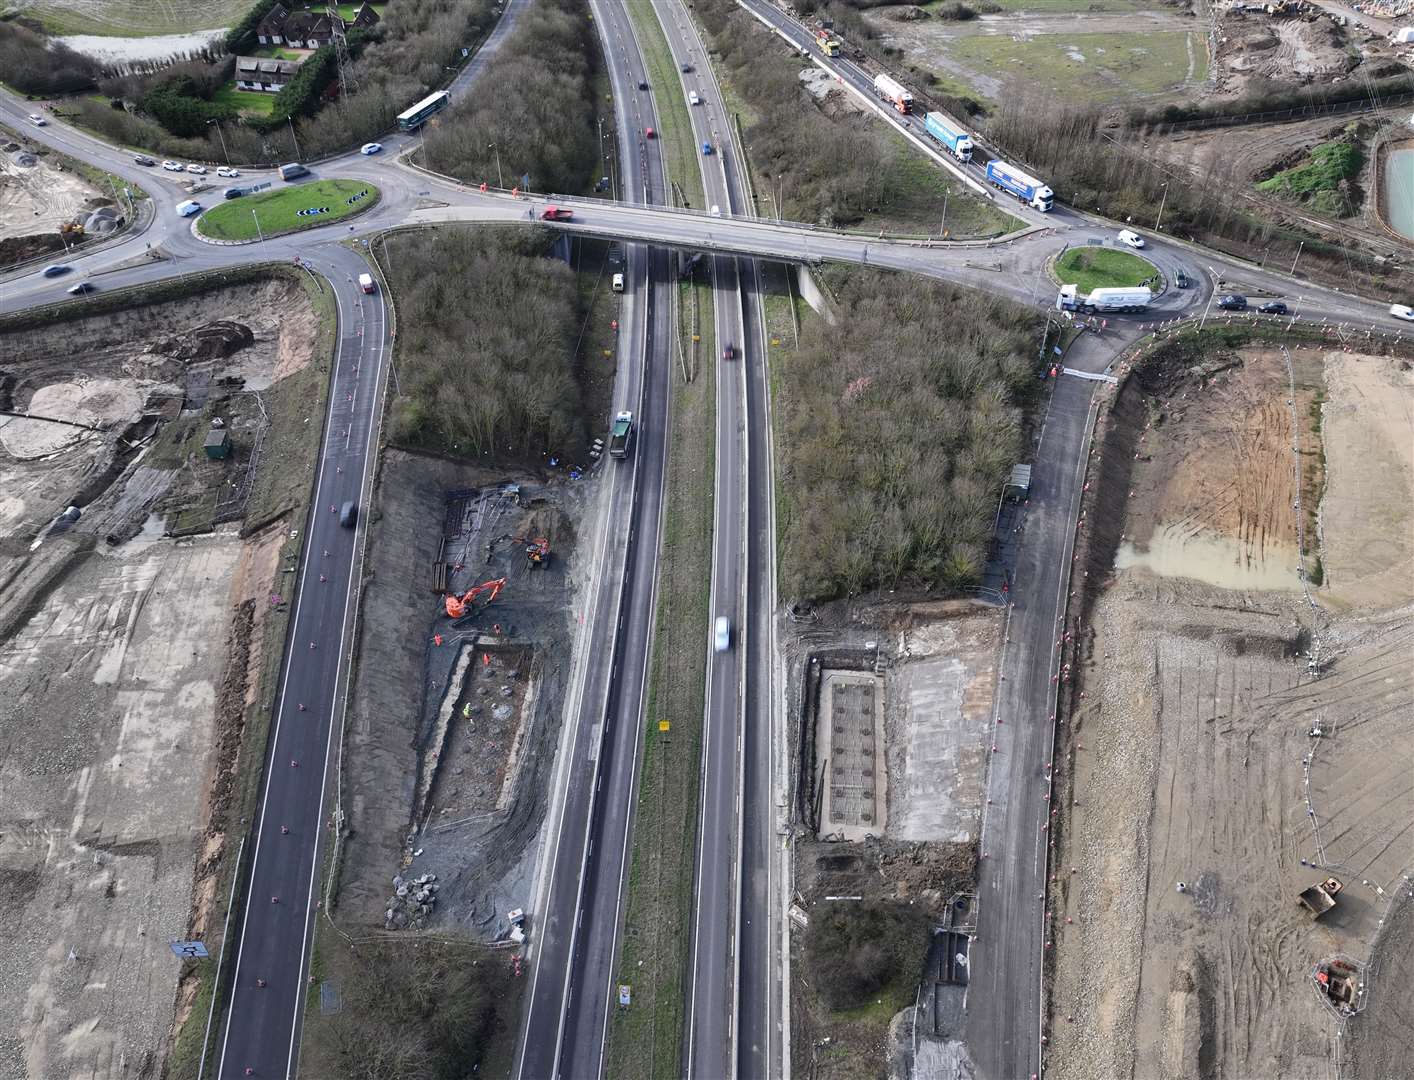 Construction of the new A249 carriageways to the south of the Stockbury roundabout is ongoing. Picture: Phil Drew